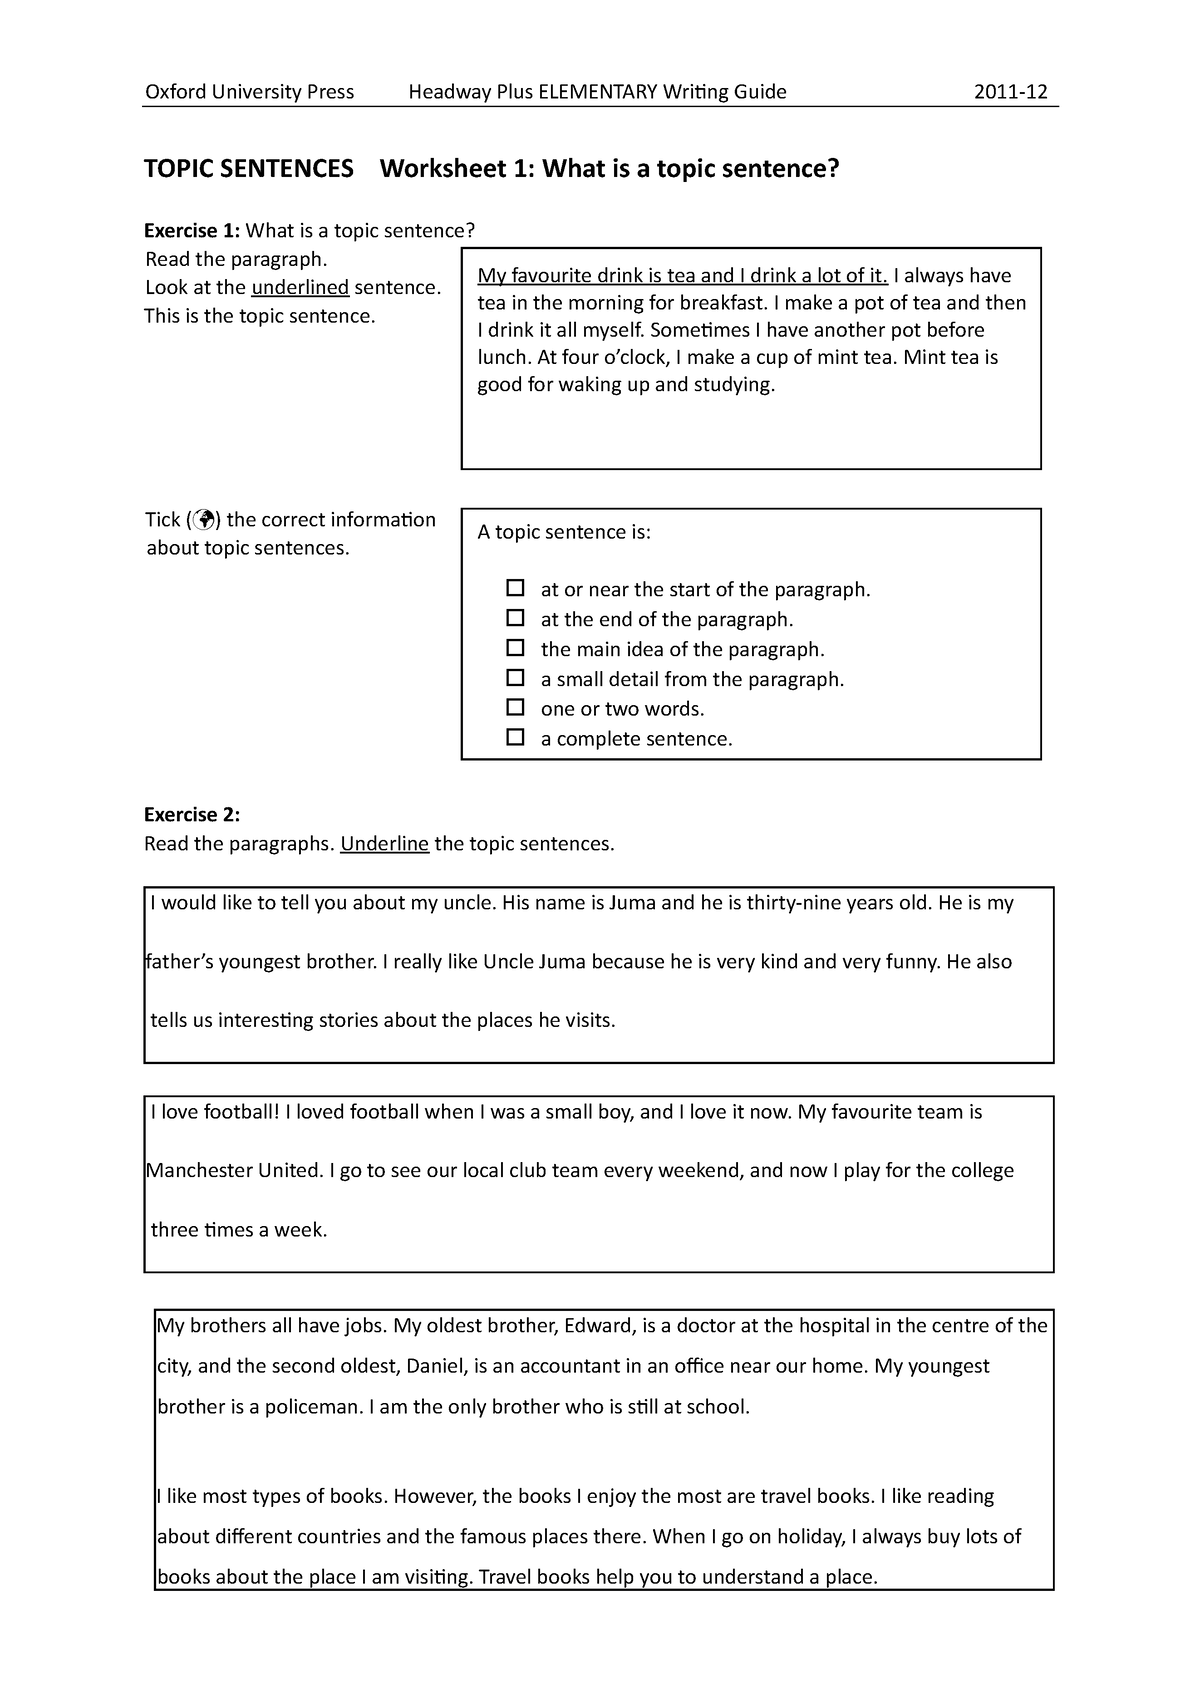 Topic Sentences Worksheet 1 What Is A Topic Sentence